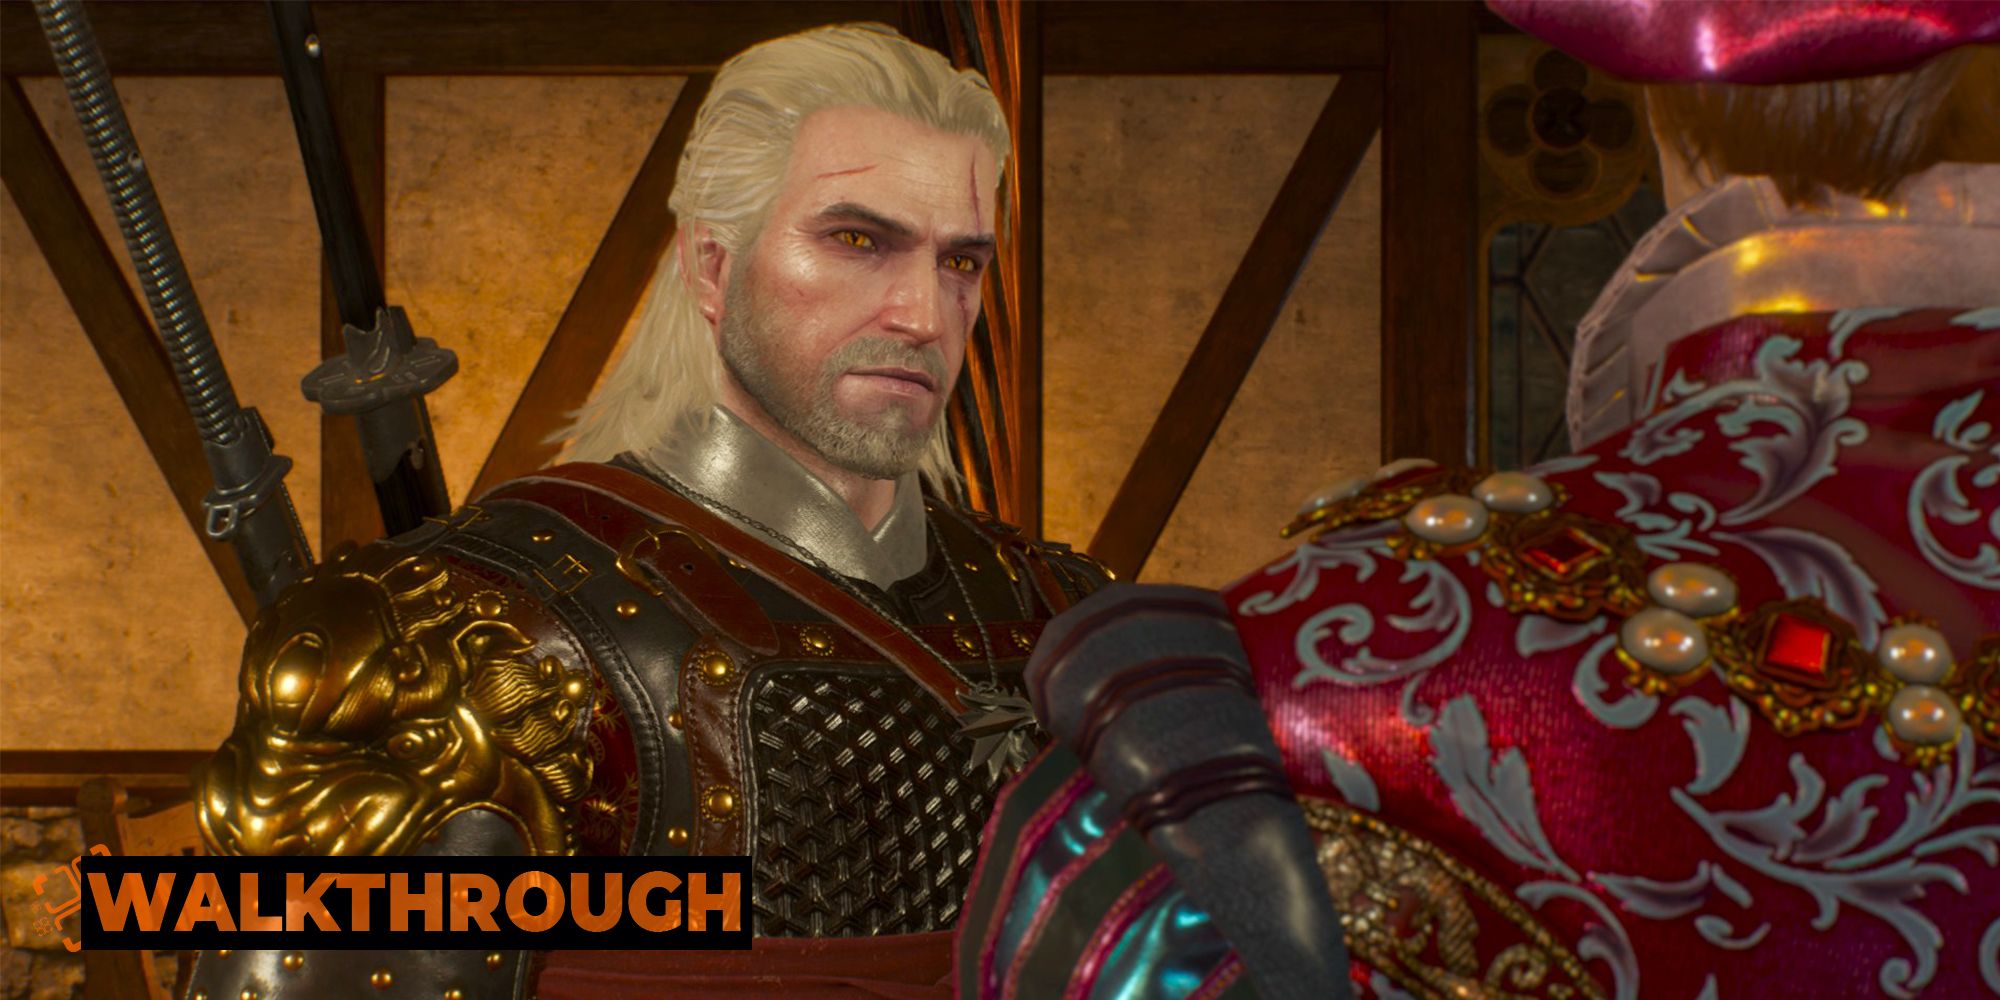 Geralt gives Dandelion a wary look inside a medieval building in The Witcher 3